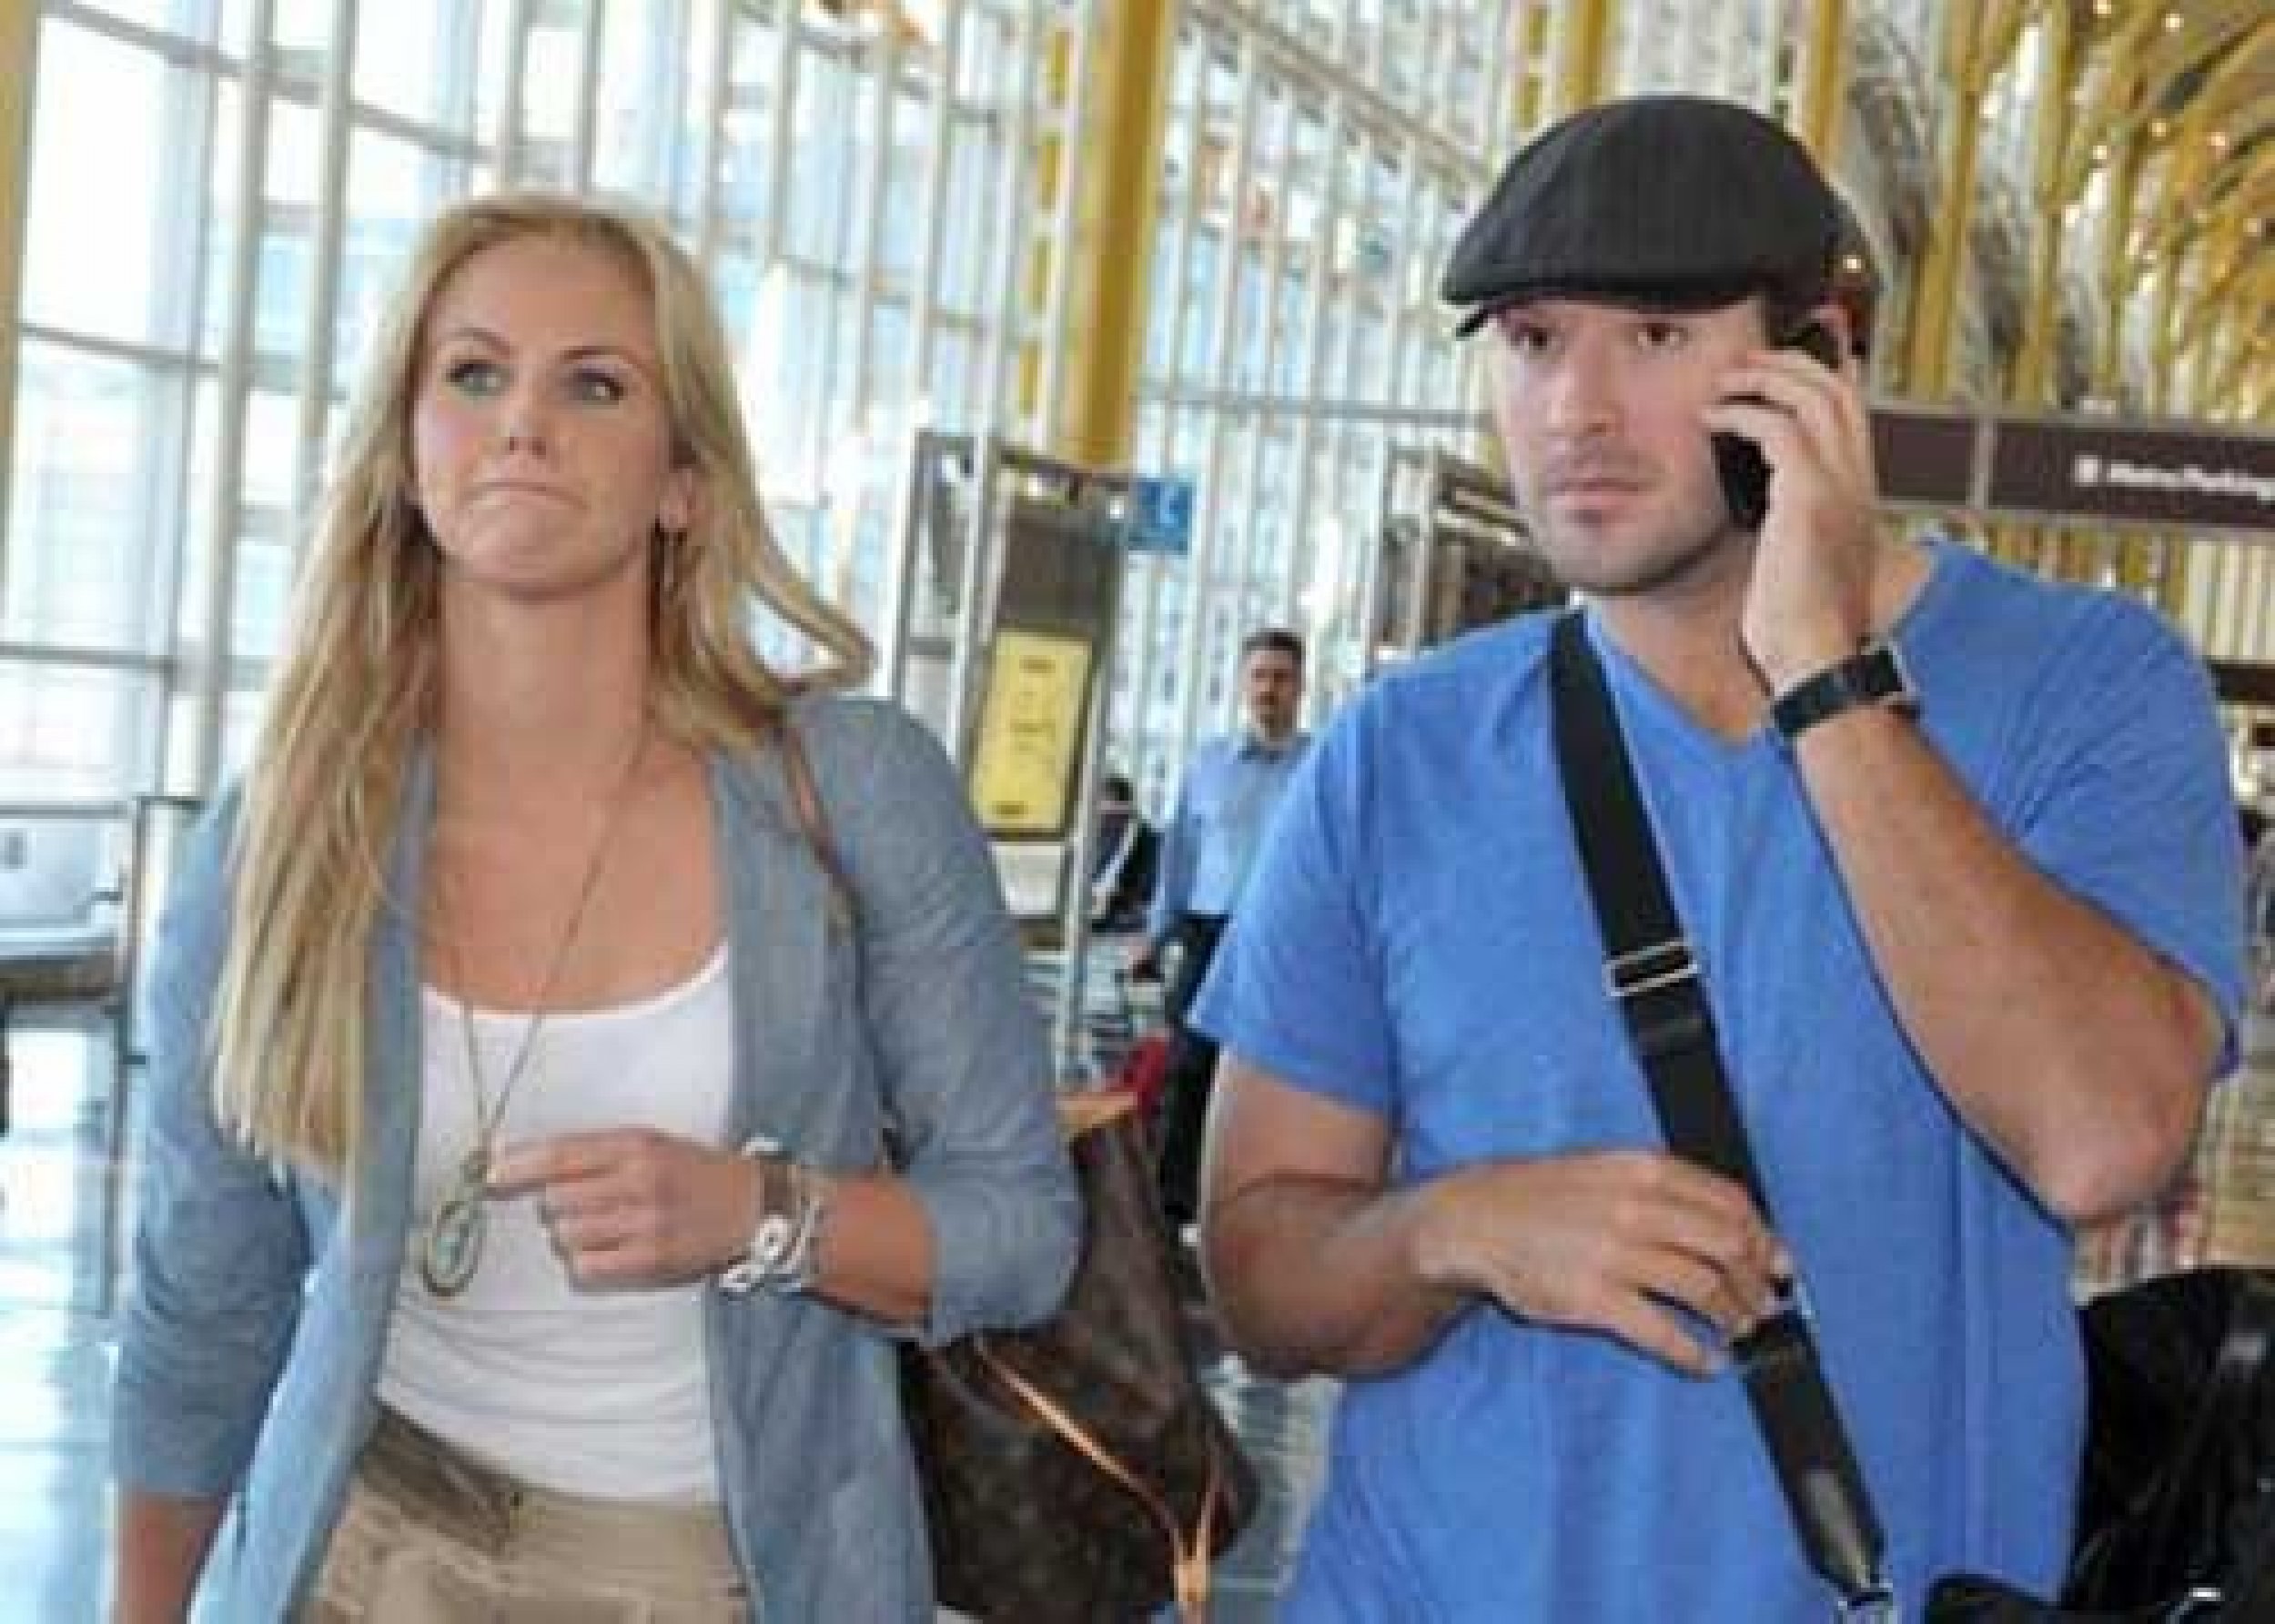 Crawford and Romo walk through an airport together.